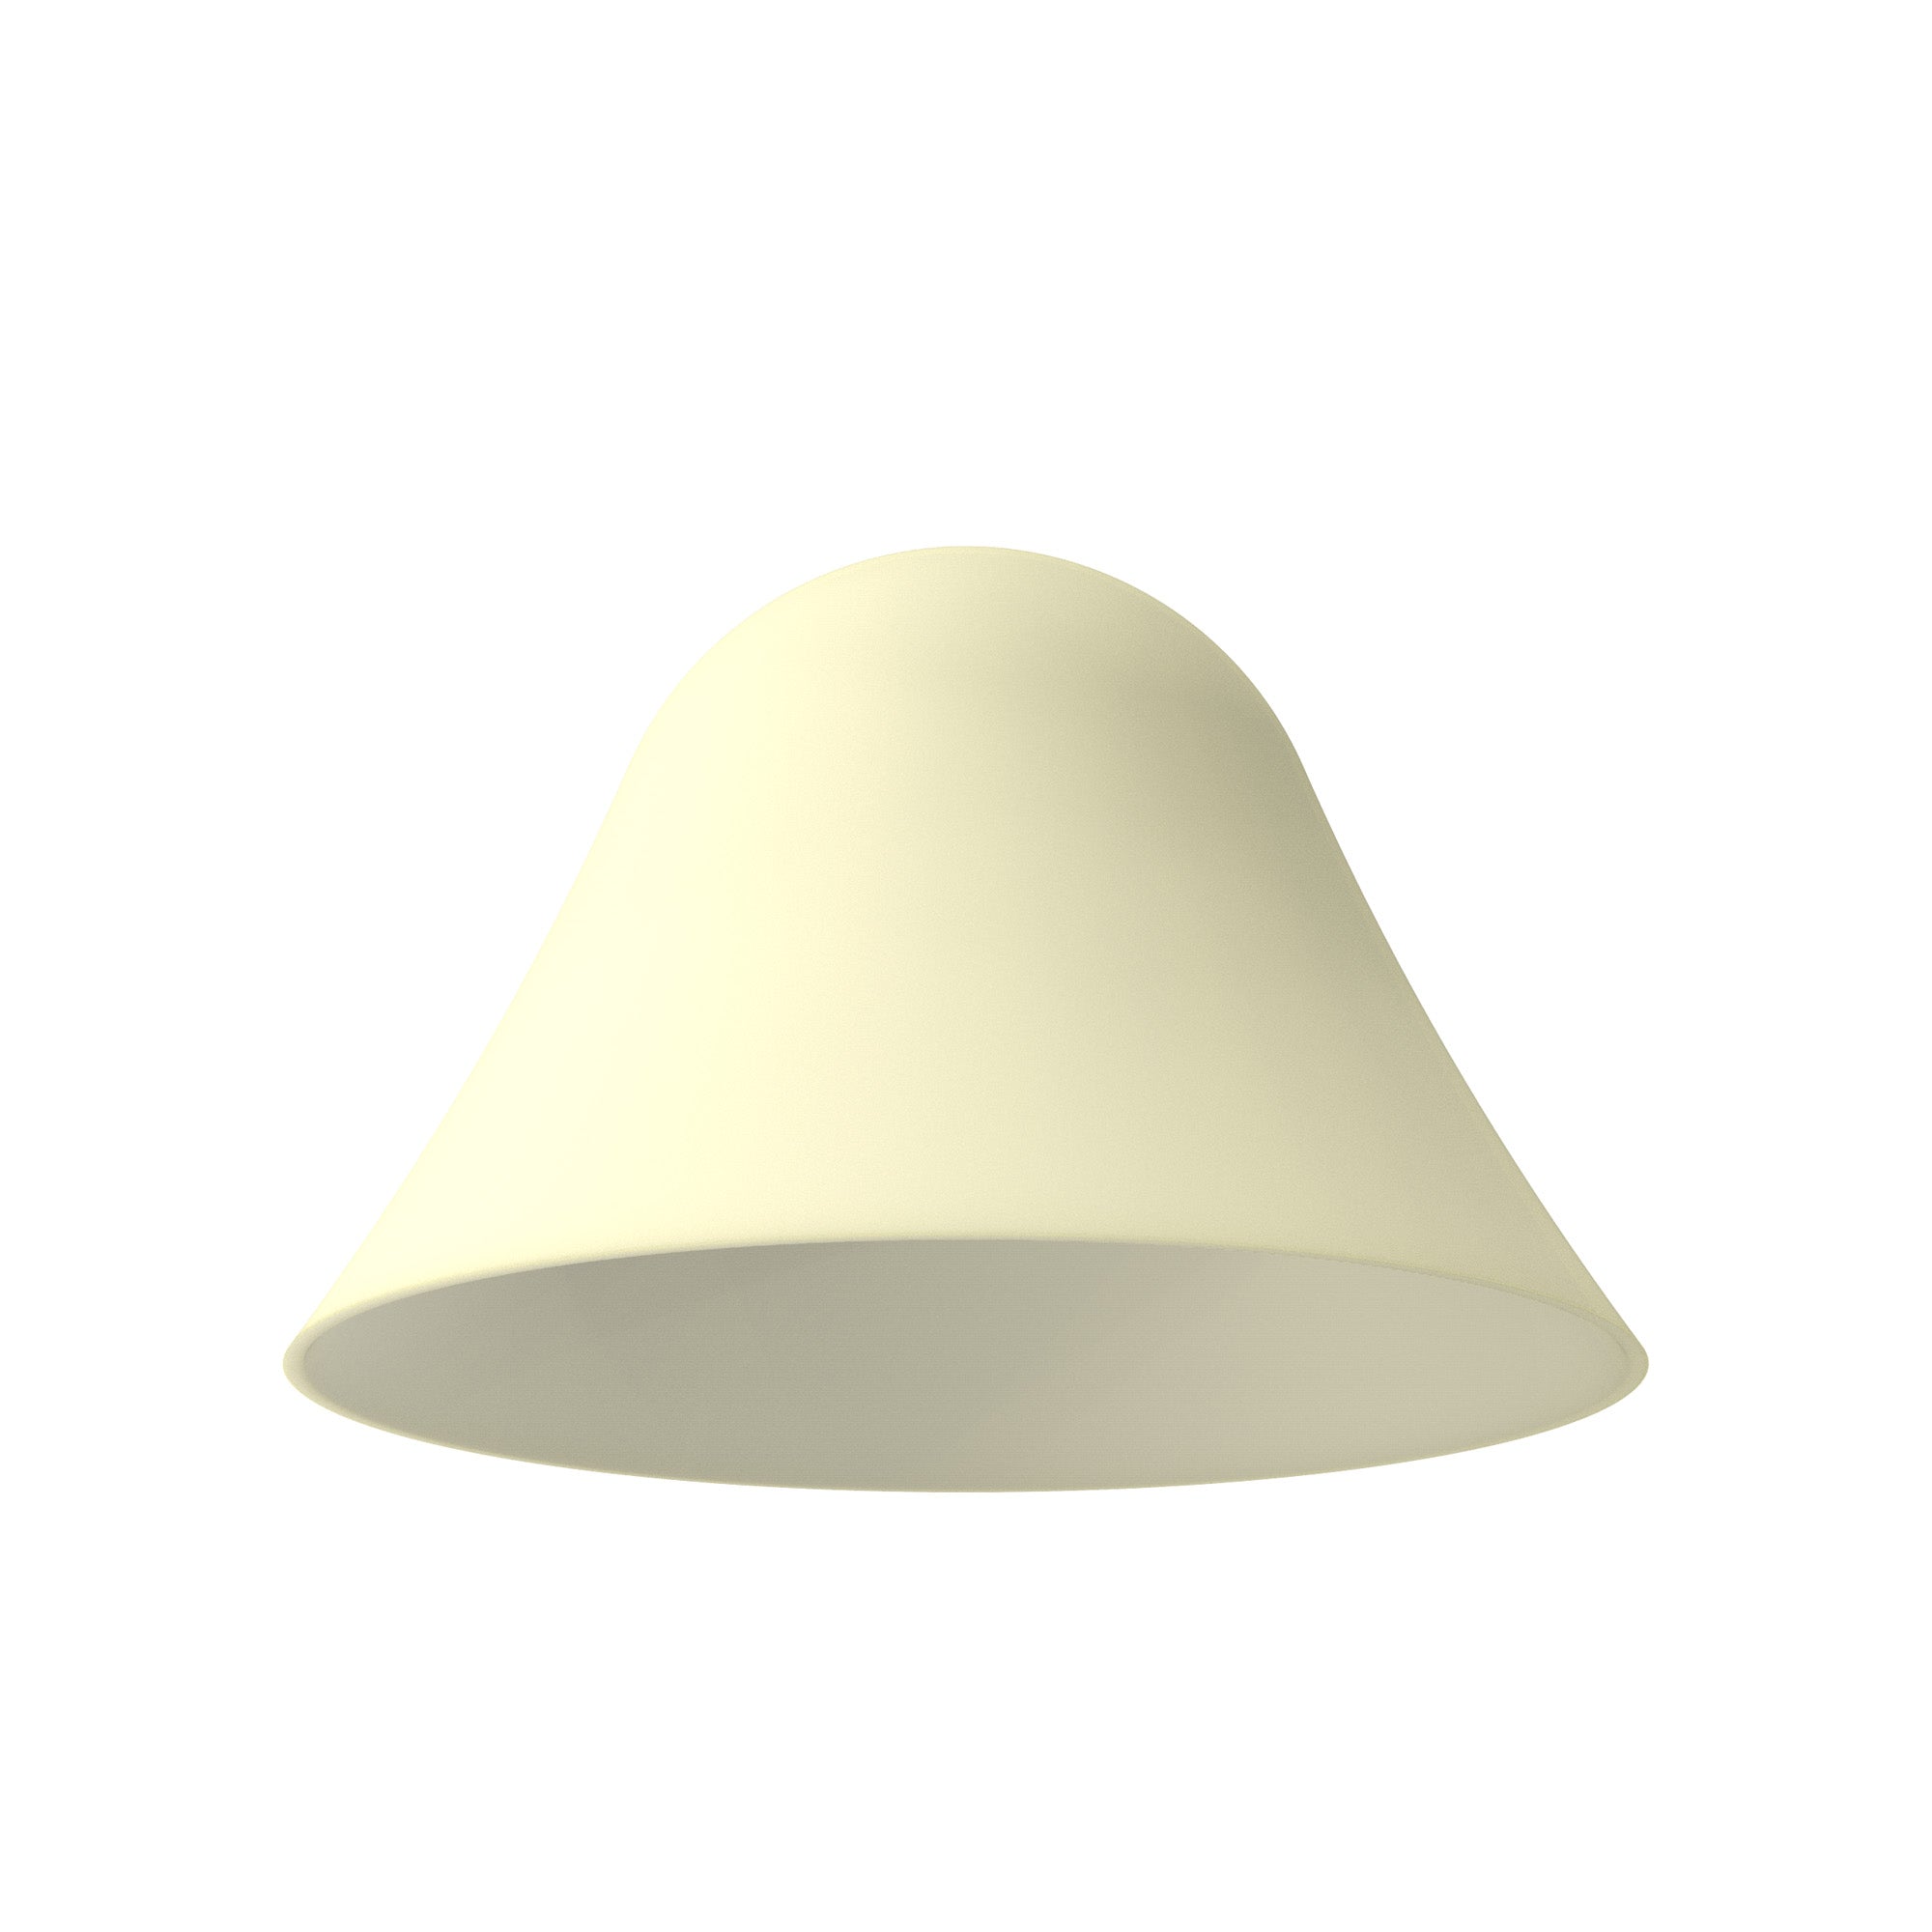 Replacement glass shade for Anita lamp